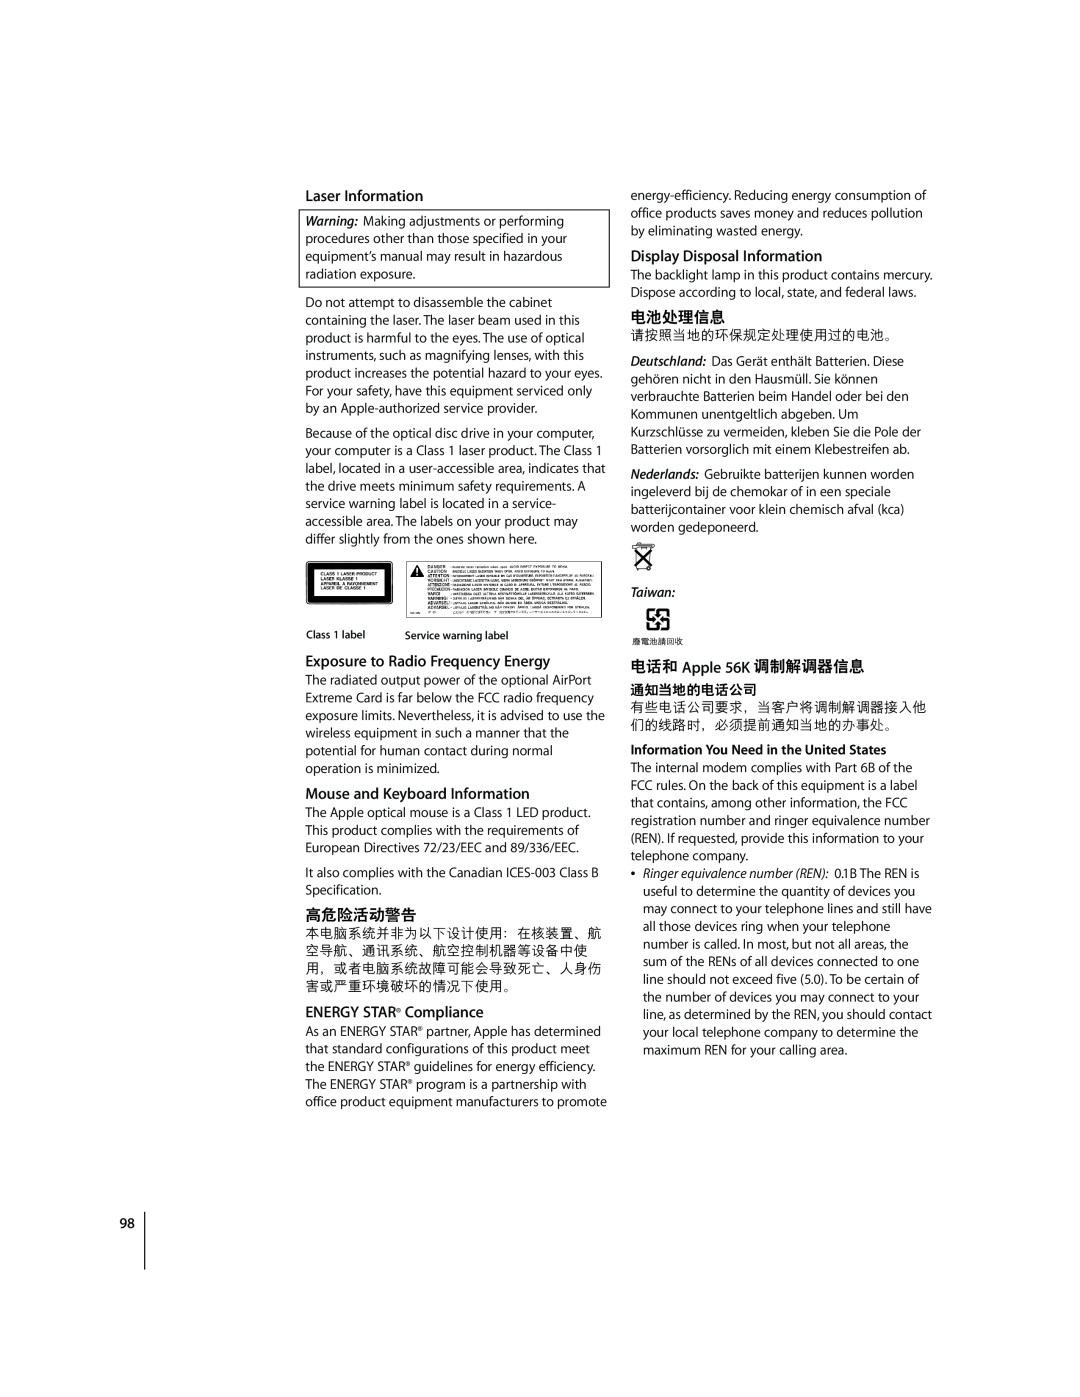 Apple G4 12 Laser Information, Exposure to Radio Frequency Energy, Mouse and Keyboard Information, Gyzd¼½, Apple 56K R% 